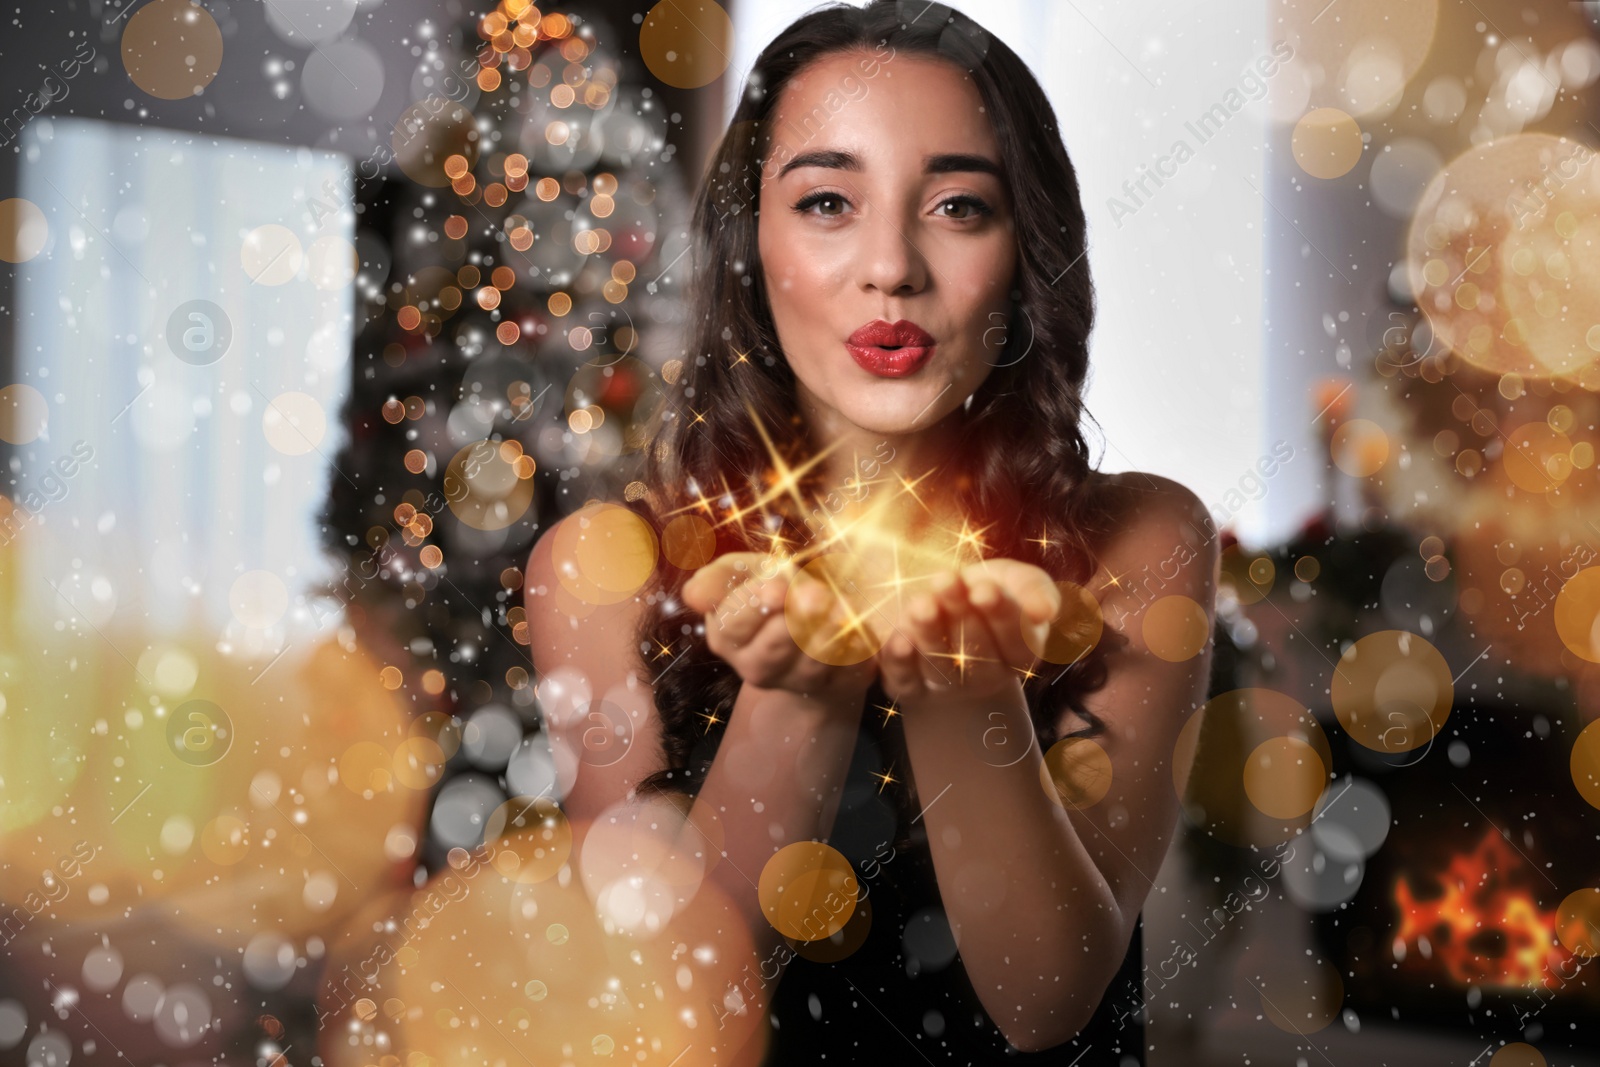 Image of Beautiful young woman wearing elegant dress blowing kiss in room decorated for Christmas